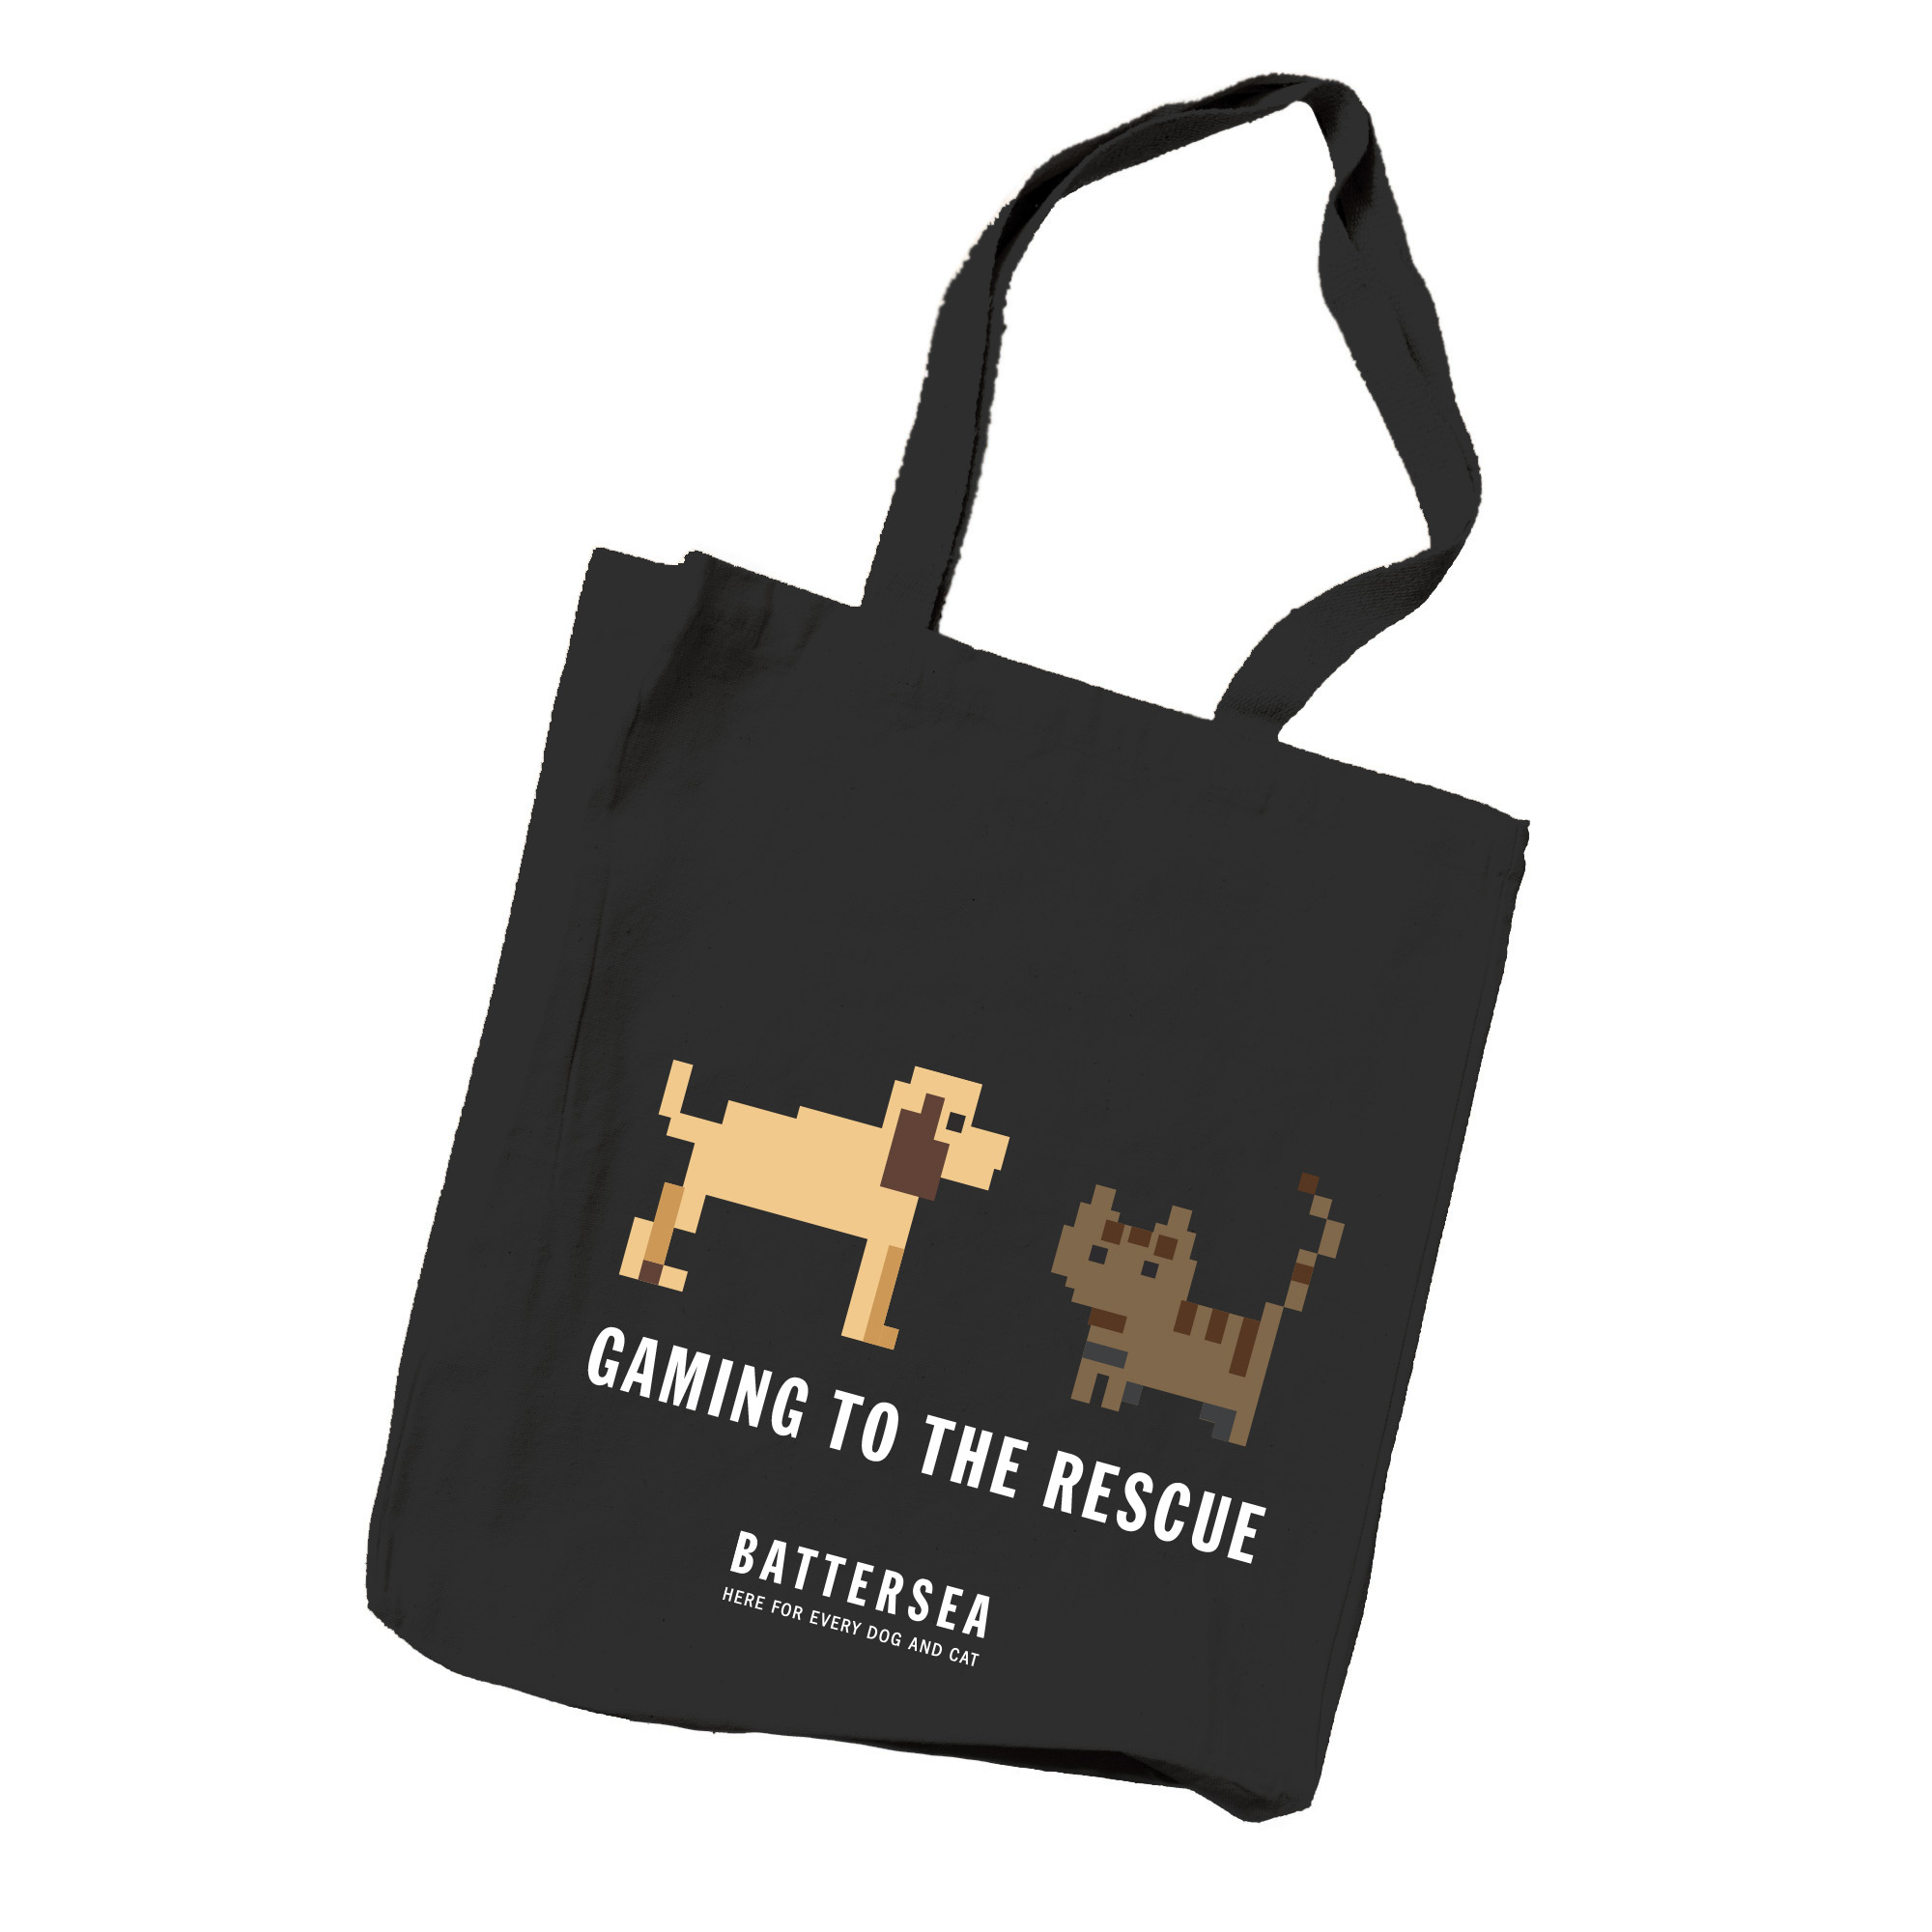 Gaming to the rescue branded tote bag